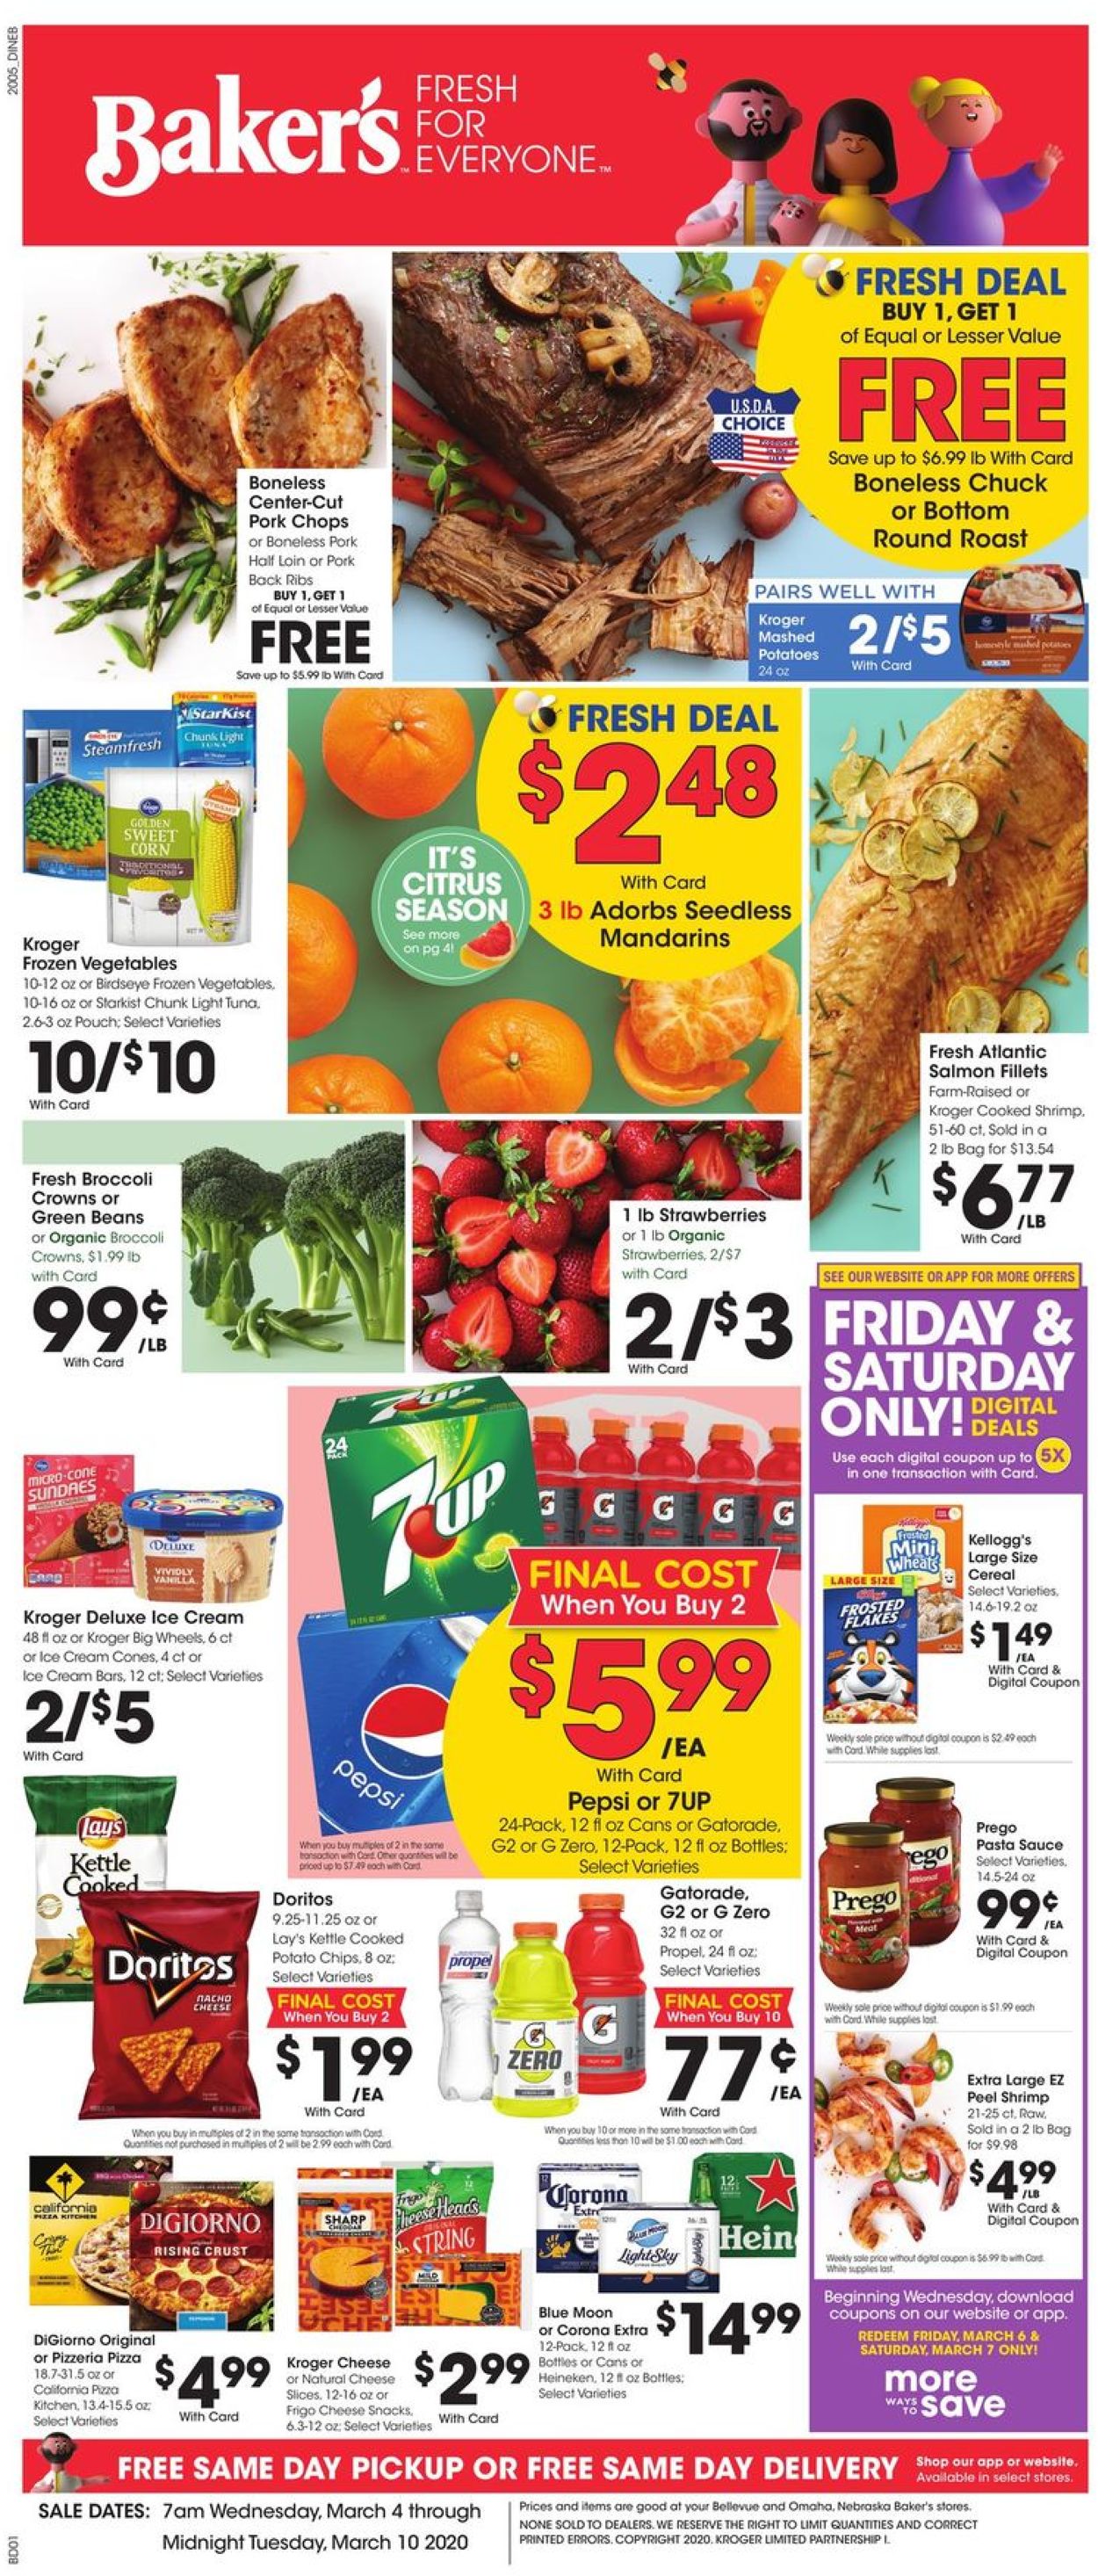 Baker's Current weekly ad 03/04 - 03/10/2020 - frequent-ads.com